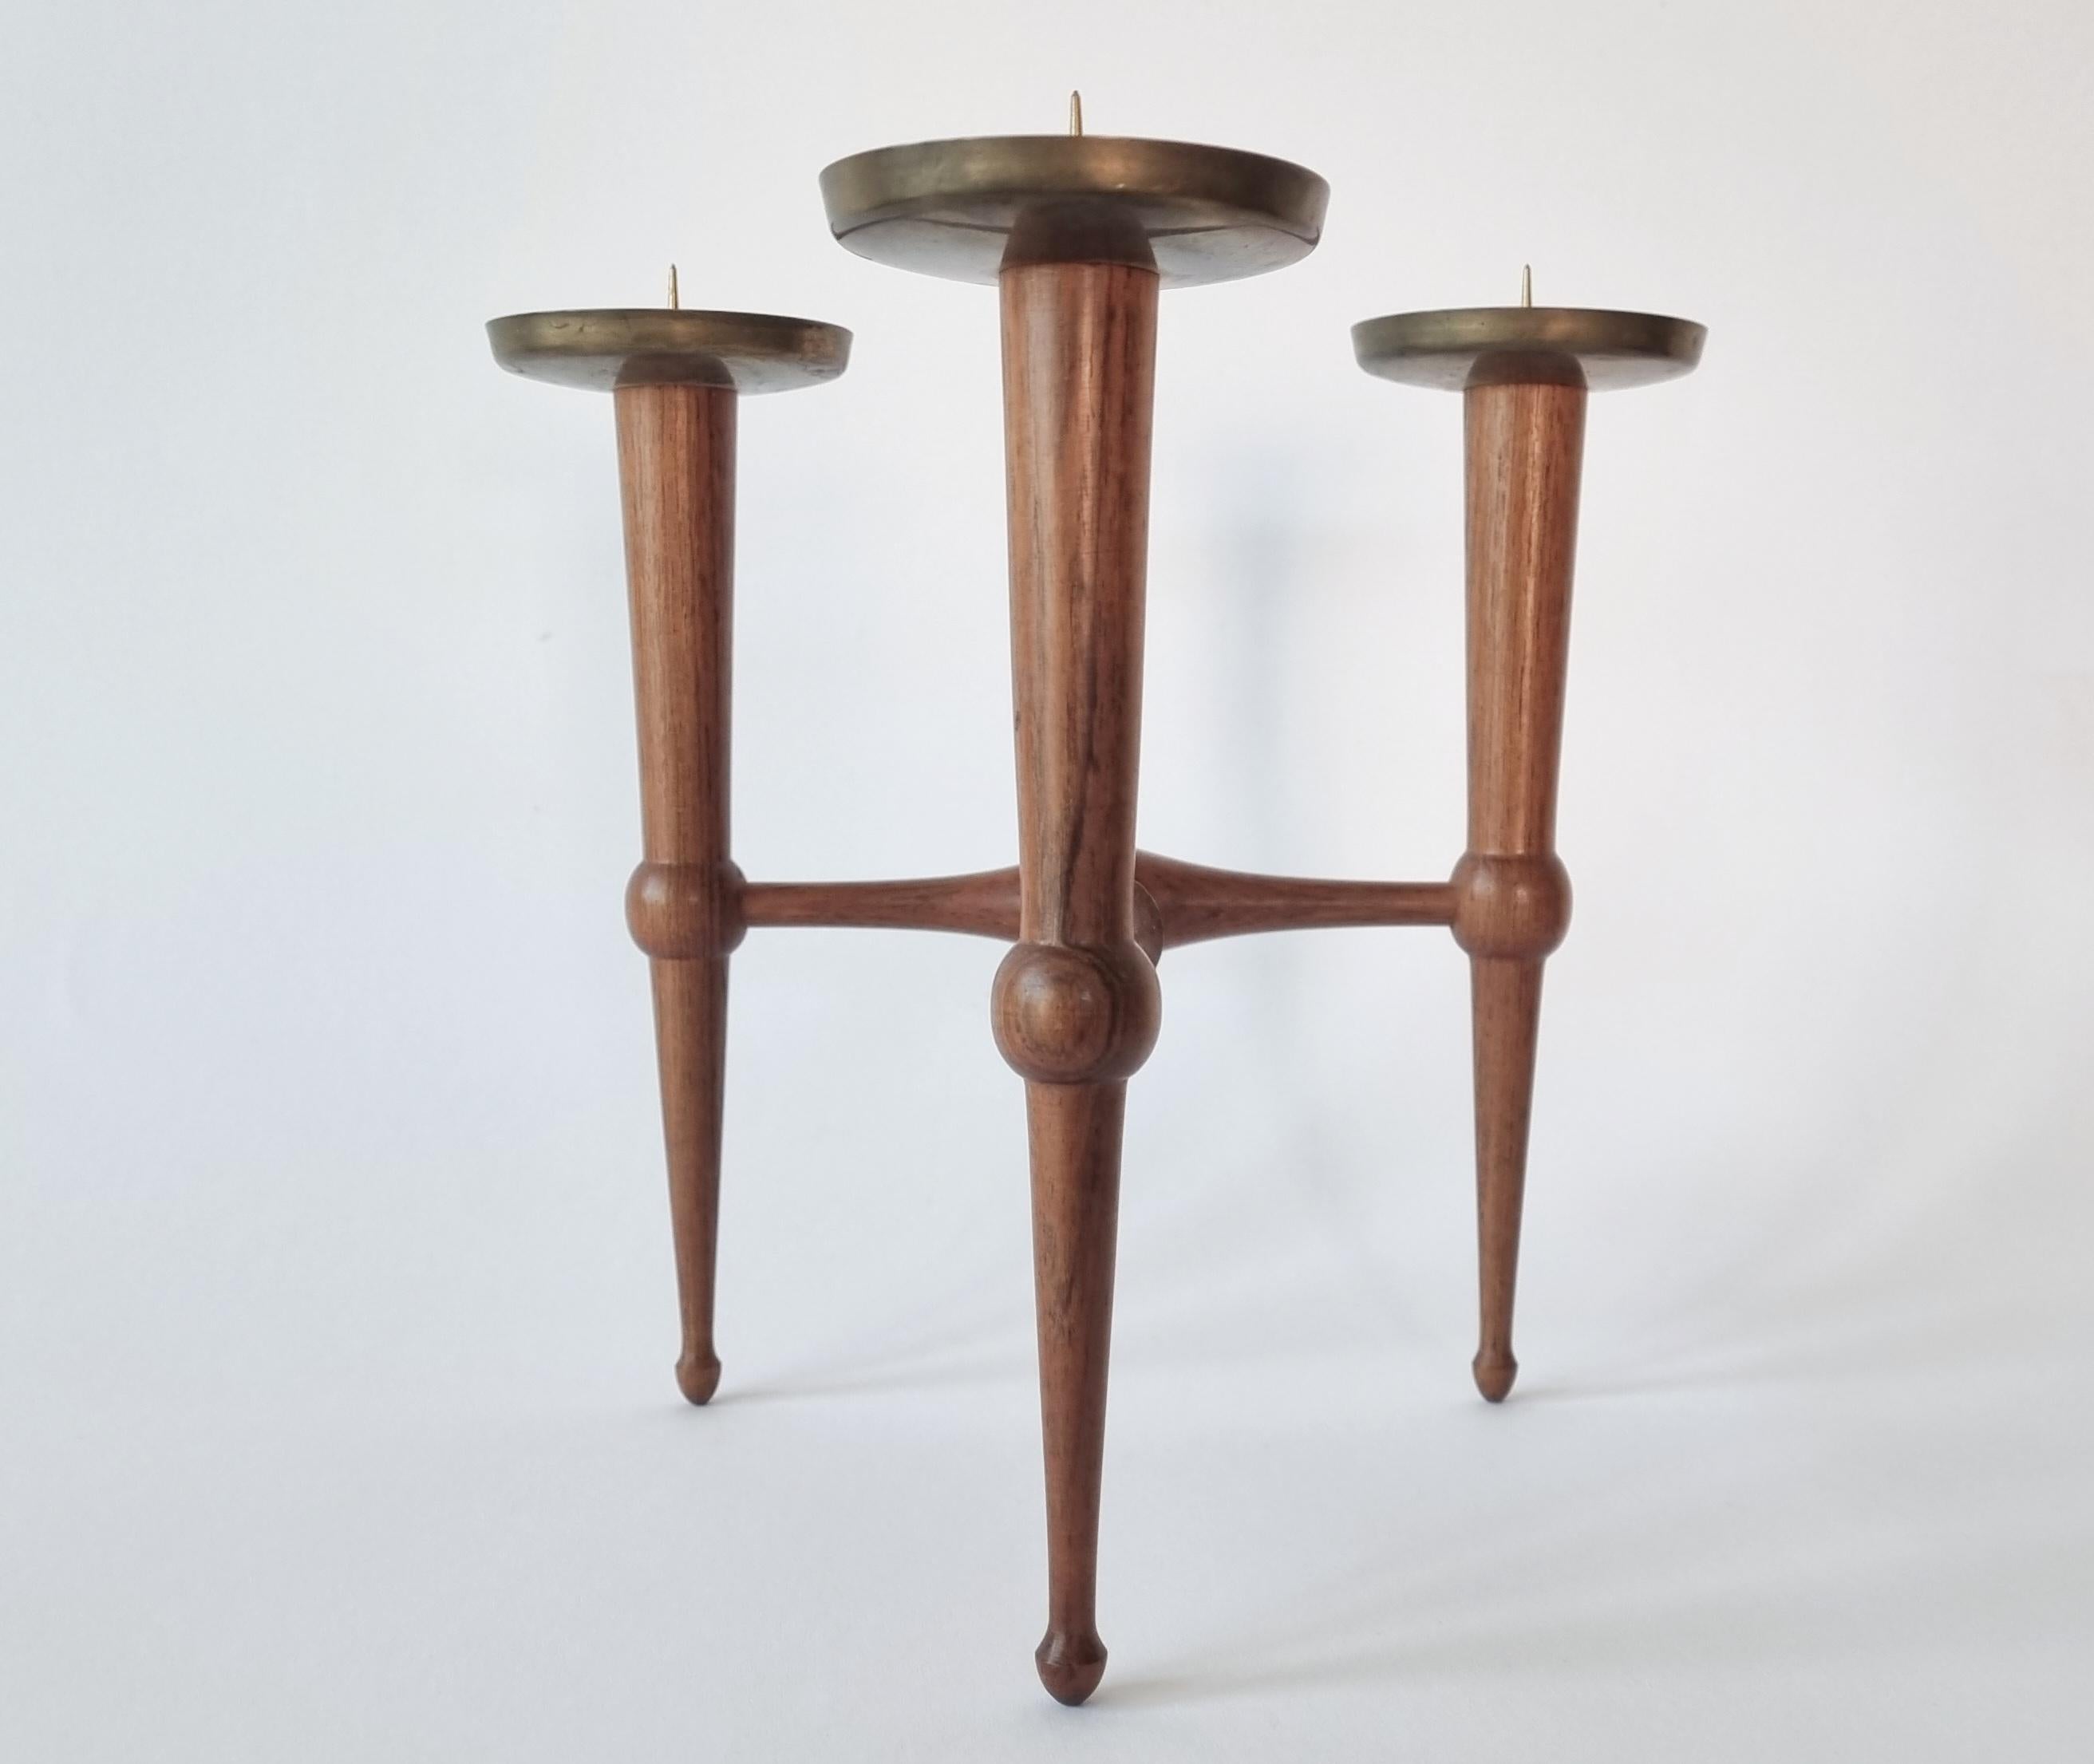 Midcentury Teak and Brass Rare Table Candle Holder / Stick, Denmark, 1960s For Sale 5